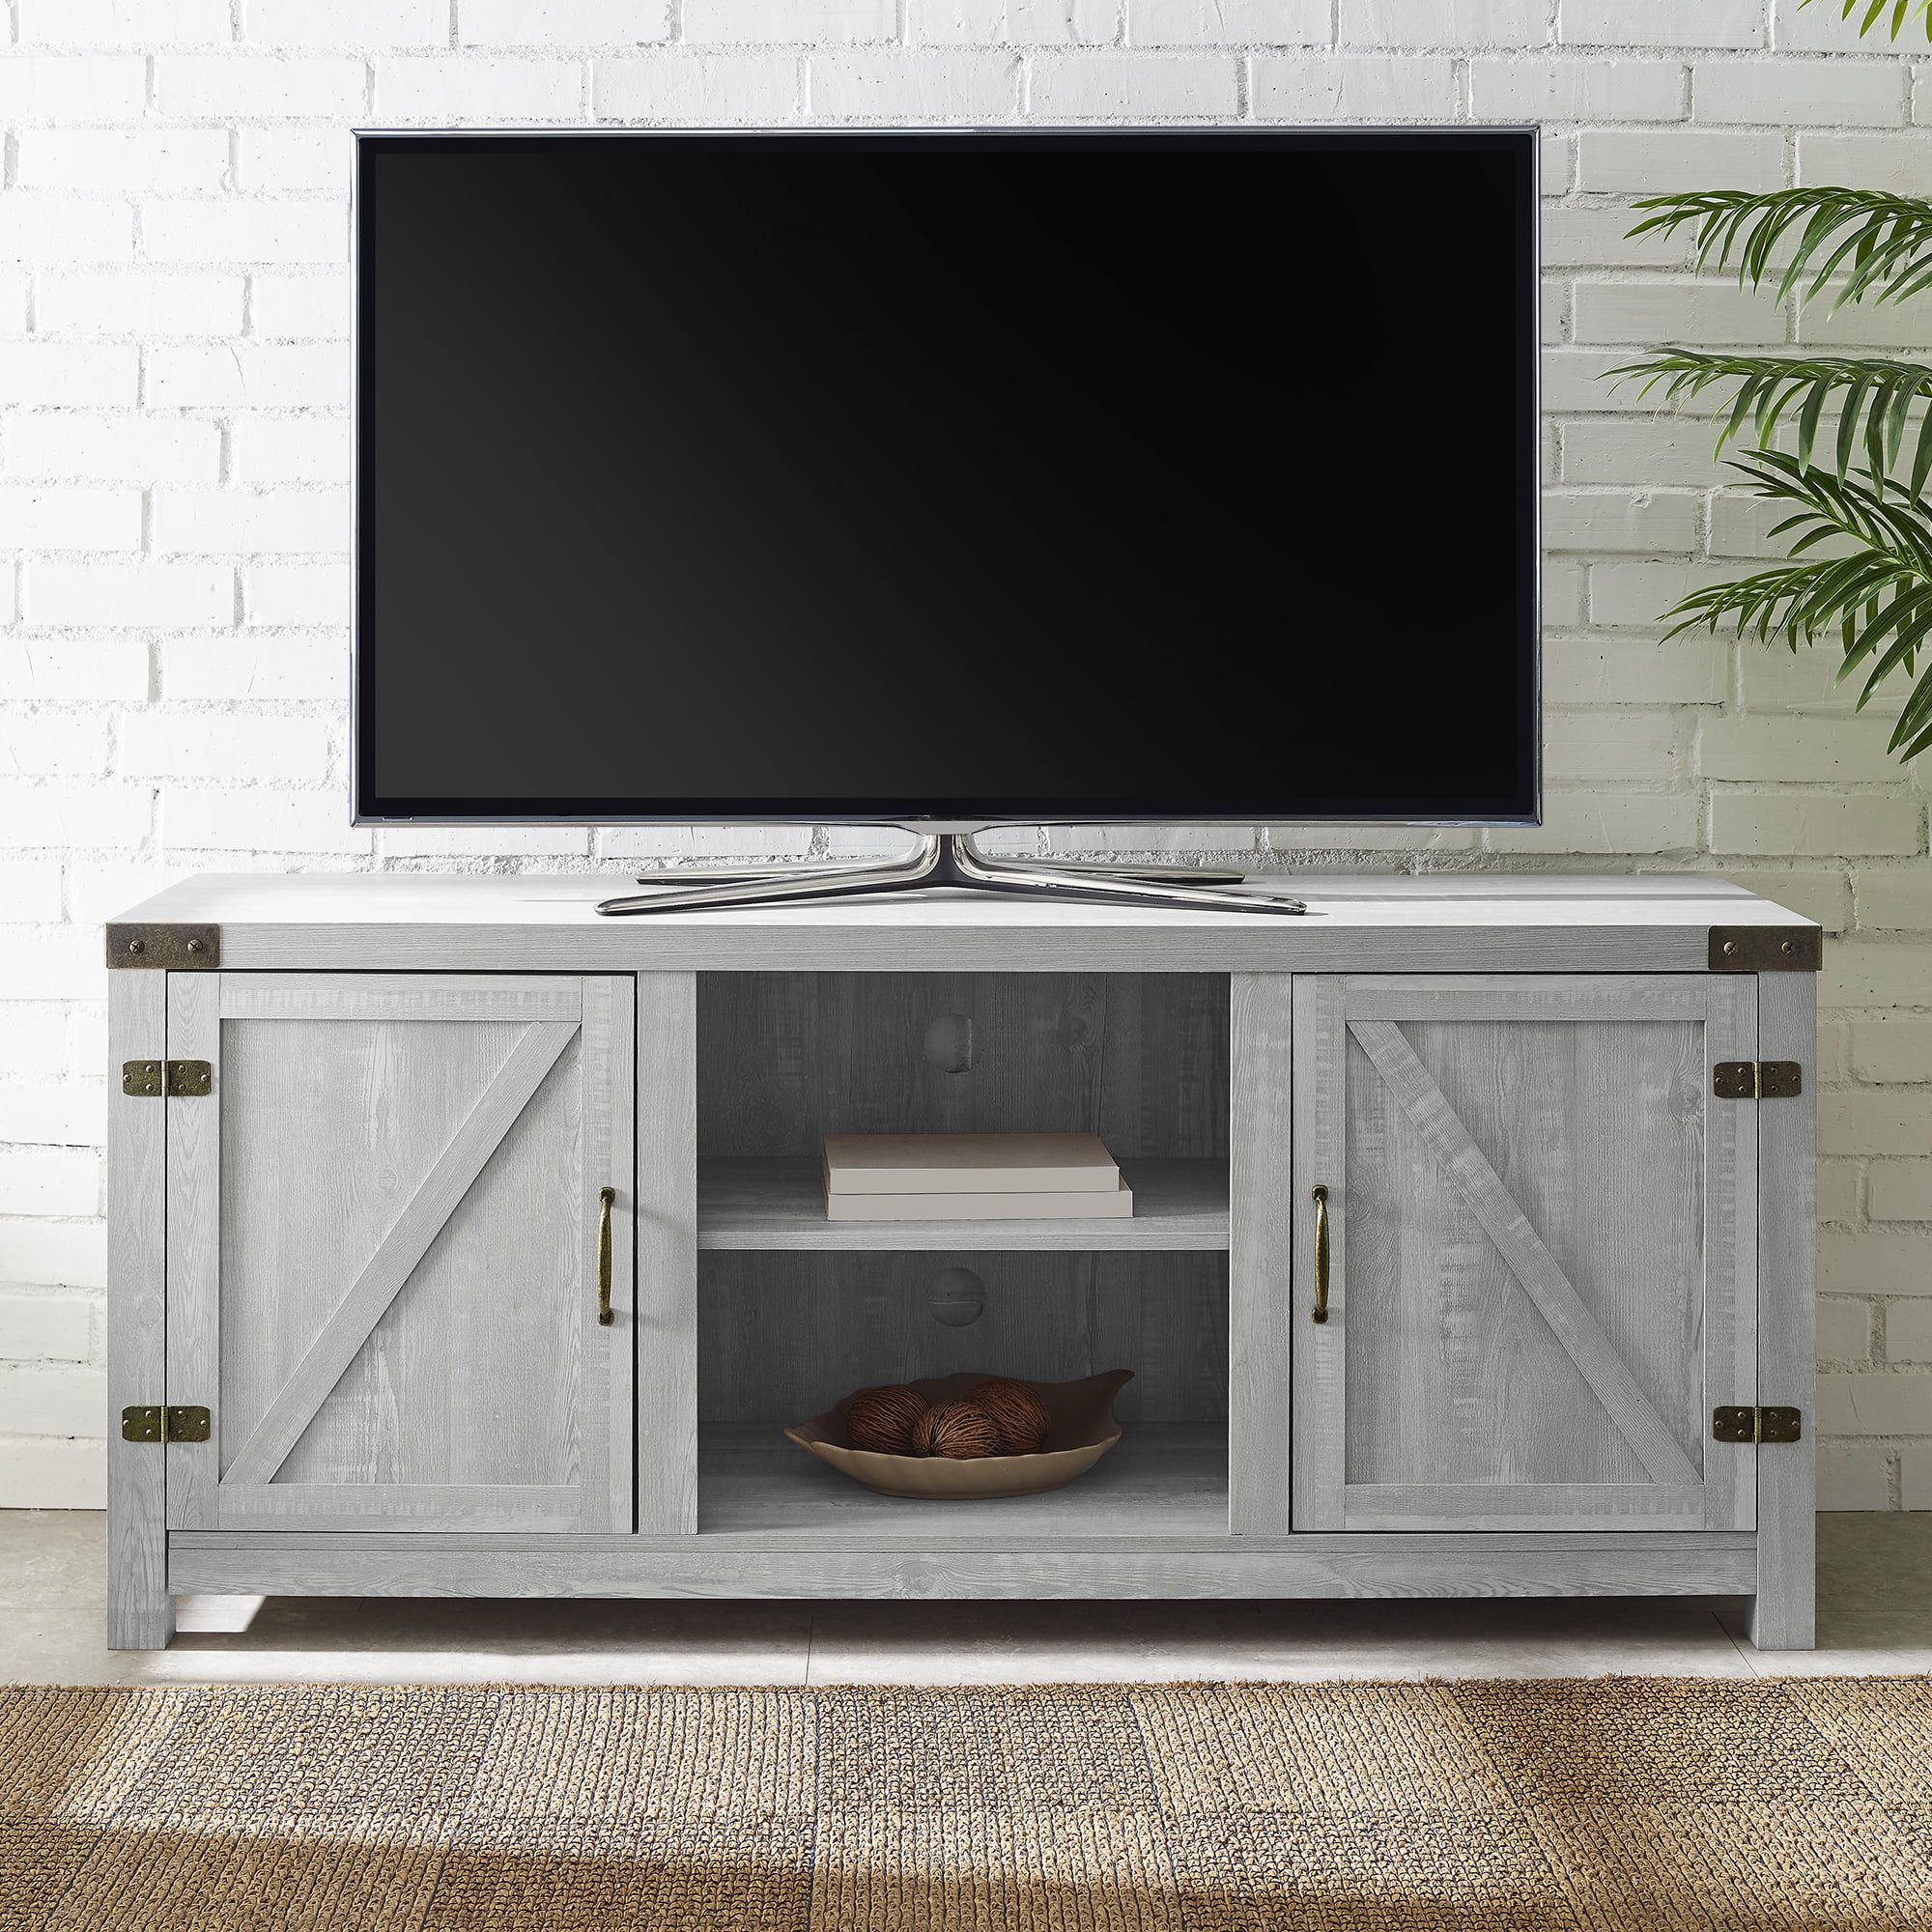 Woven Paths Modern Farmhouse Barn Door Tv Stand For Tvs Up To 65 Throughout Preferred Modern Farmhouse Rustic Tv Stands (View 7 of 15)